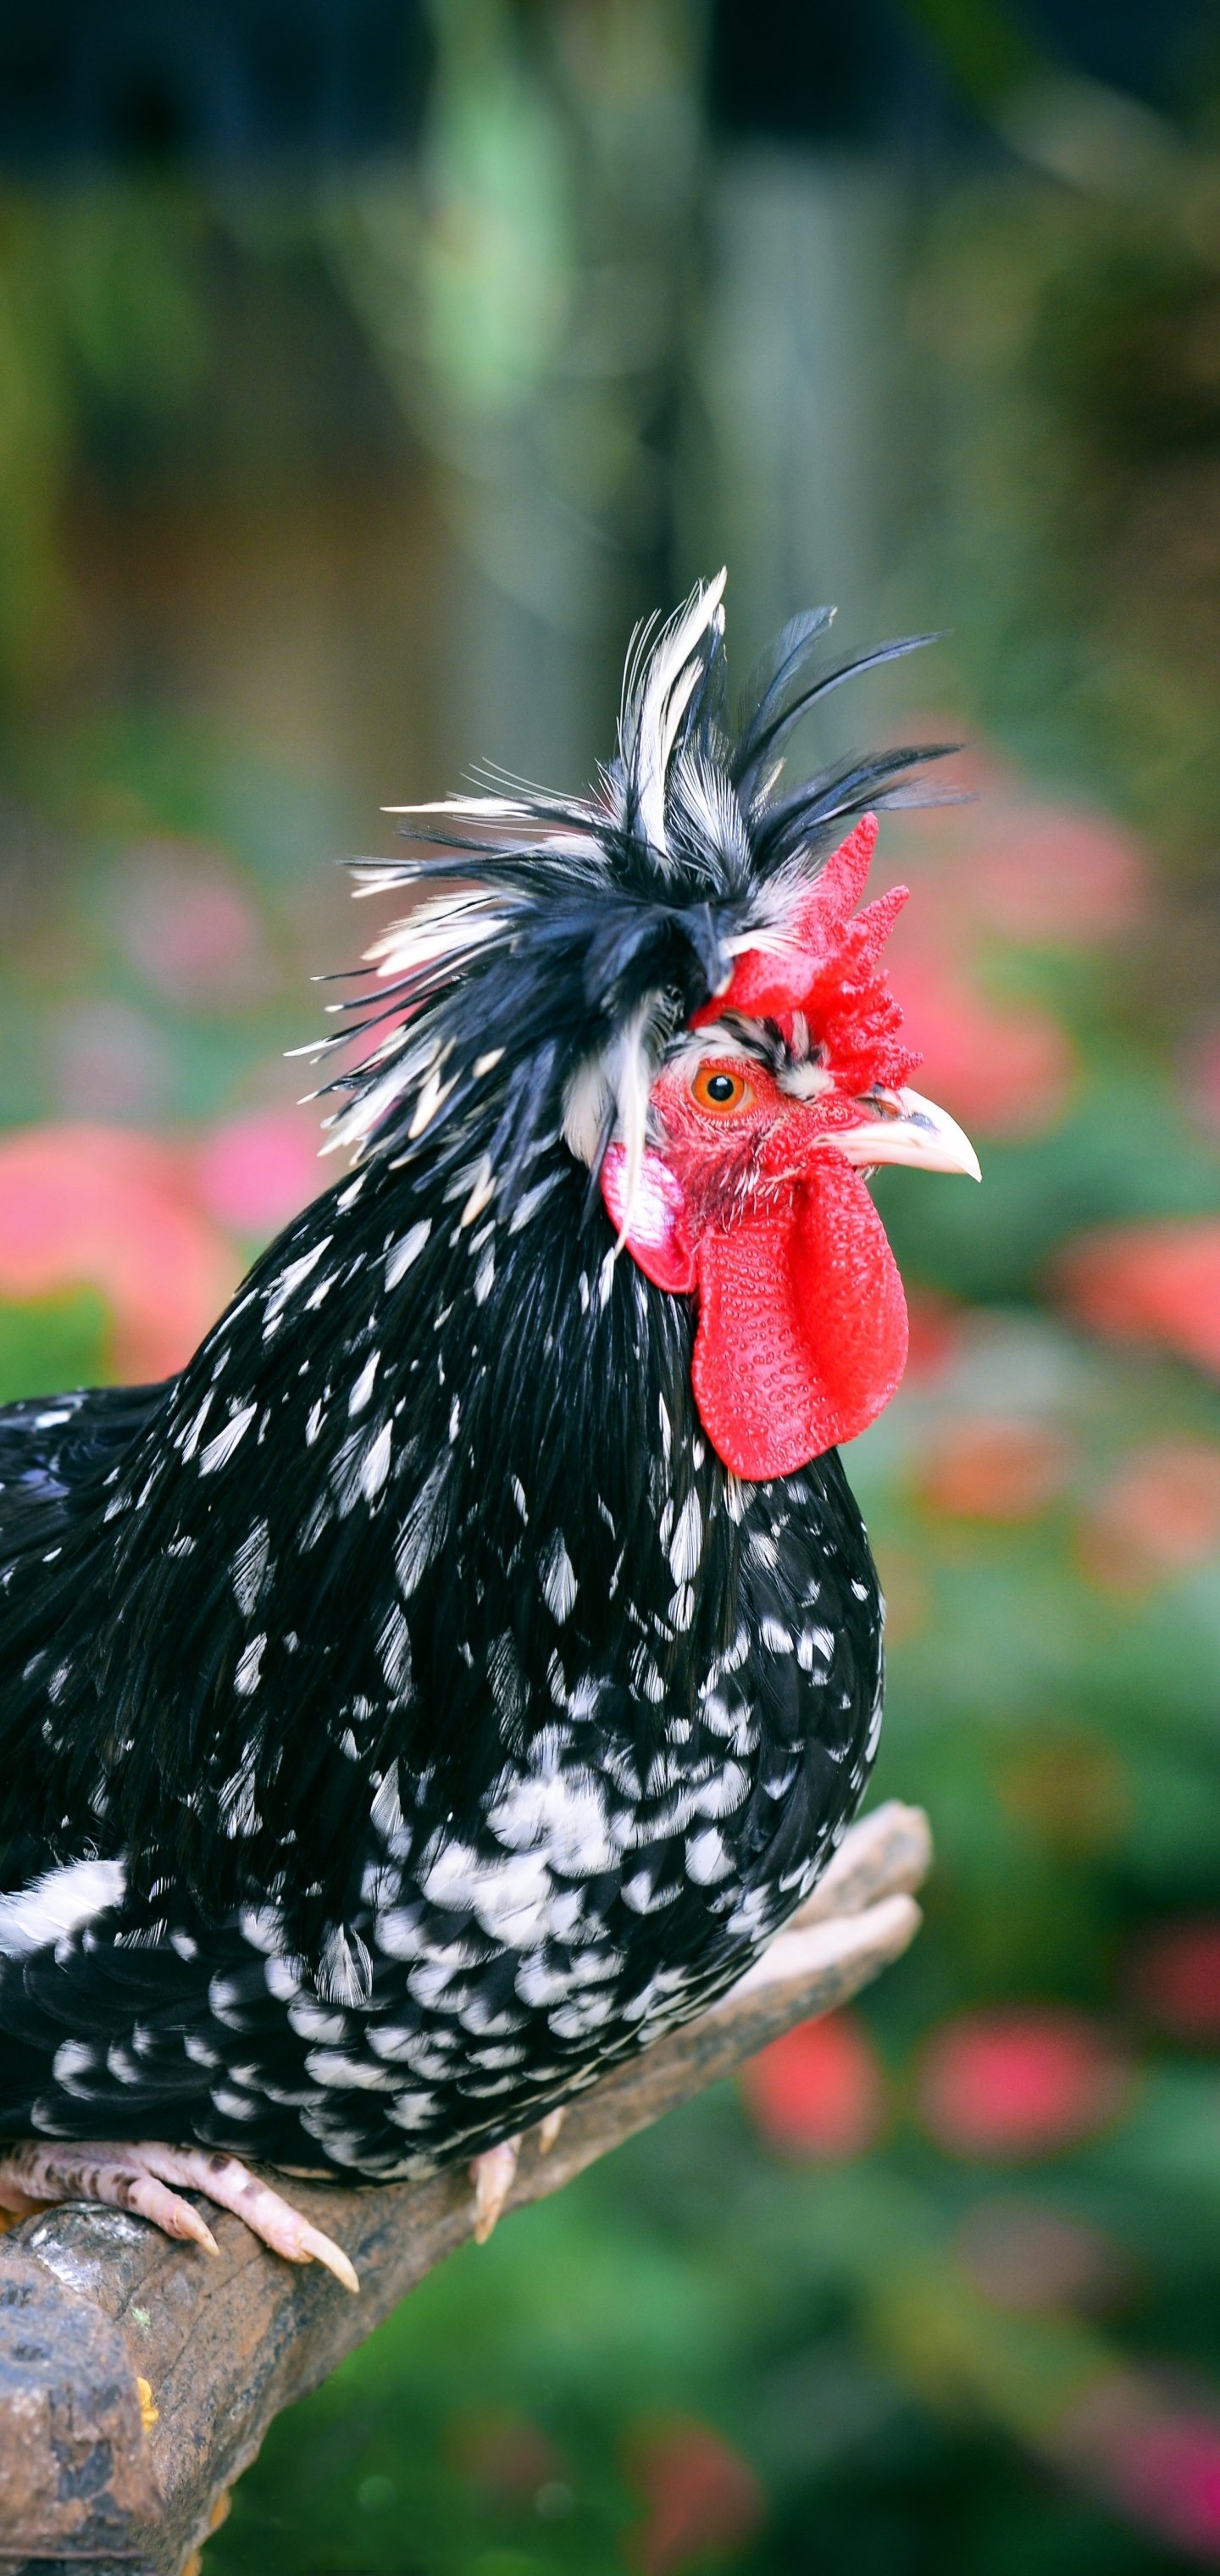 Animal companion, Feathered friend, Funny chicken, Lovely creature, 1440x3040 HD Handy